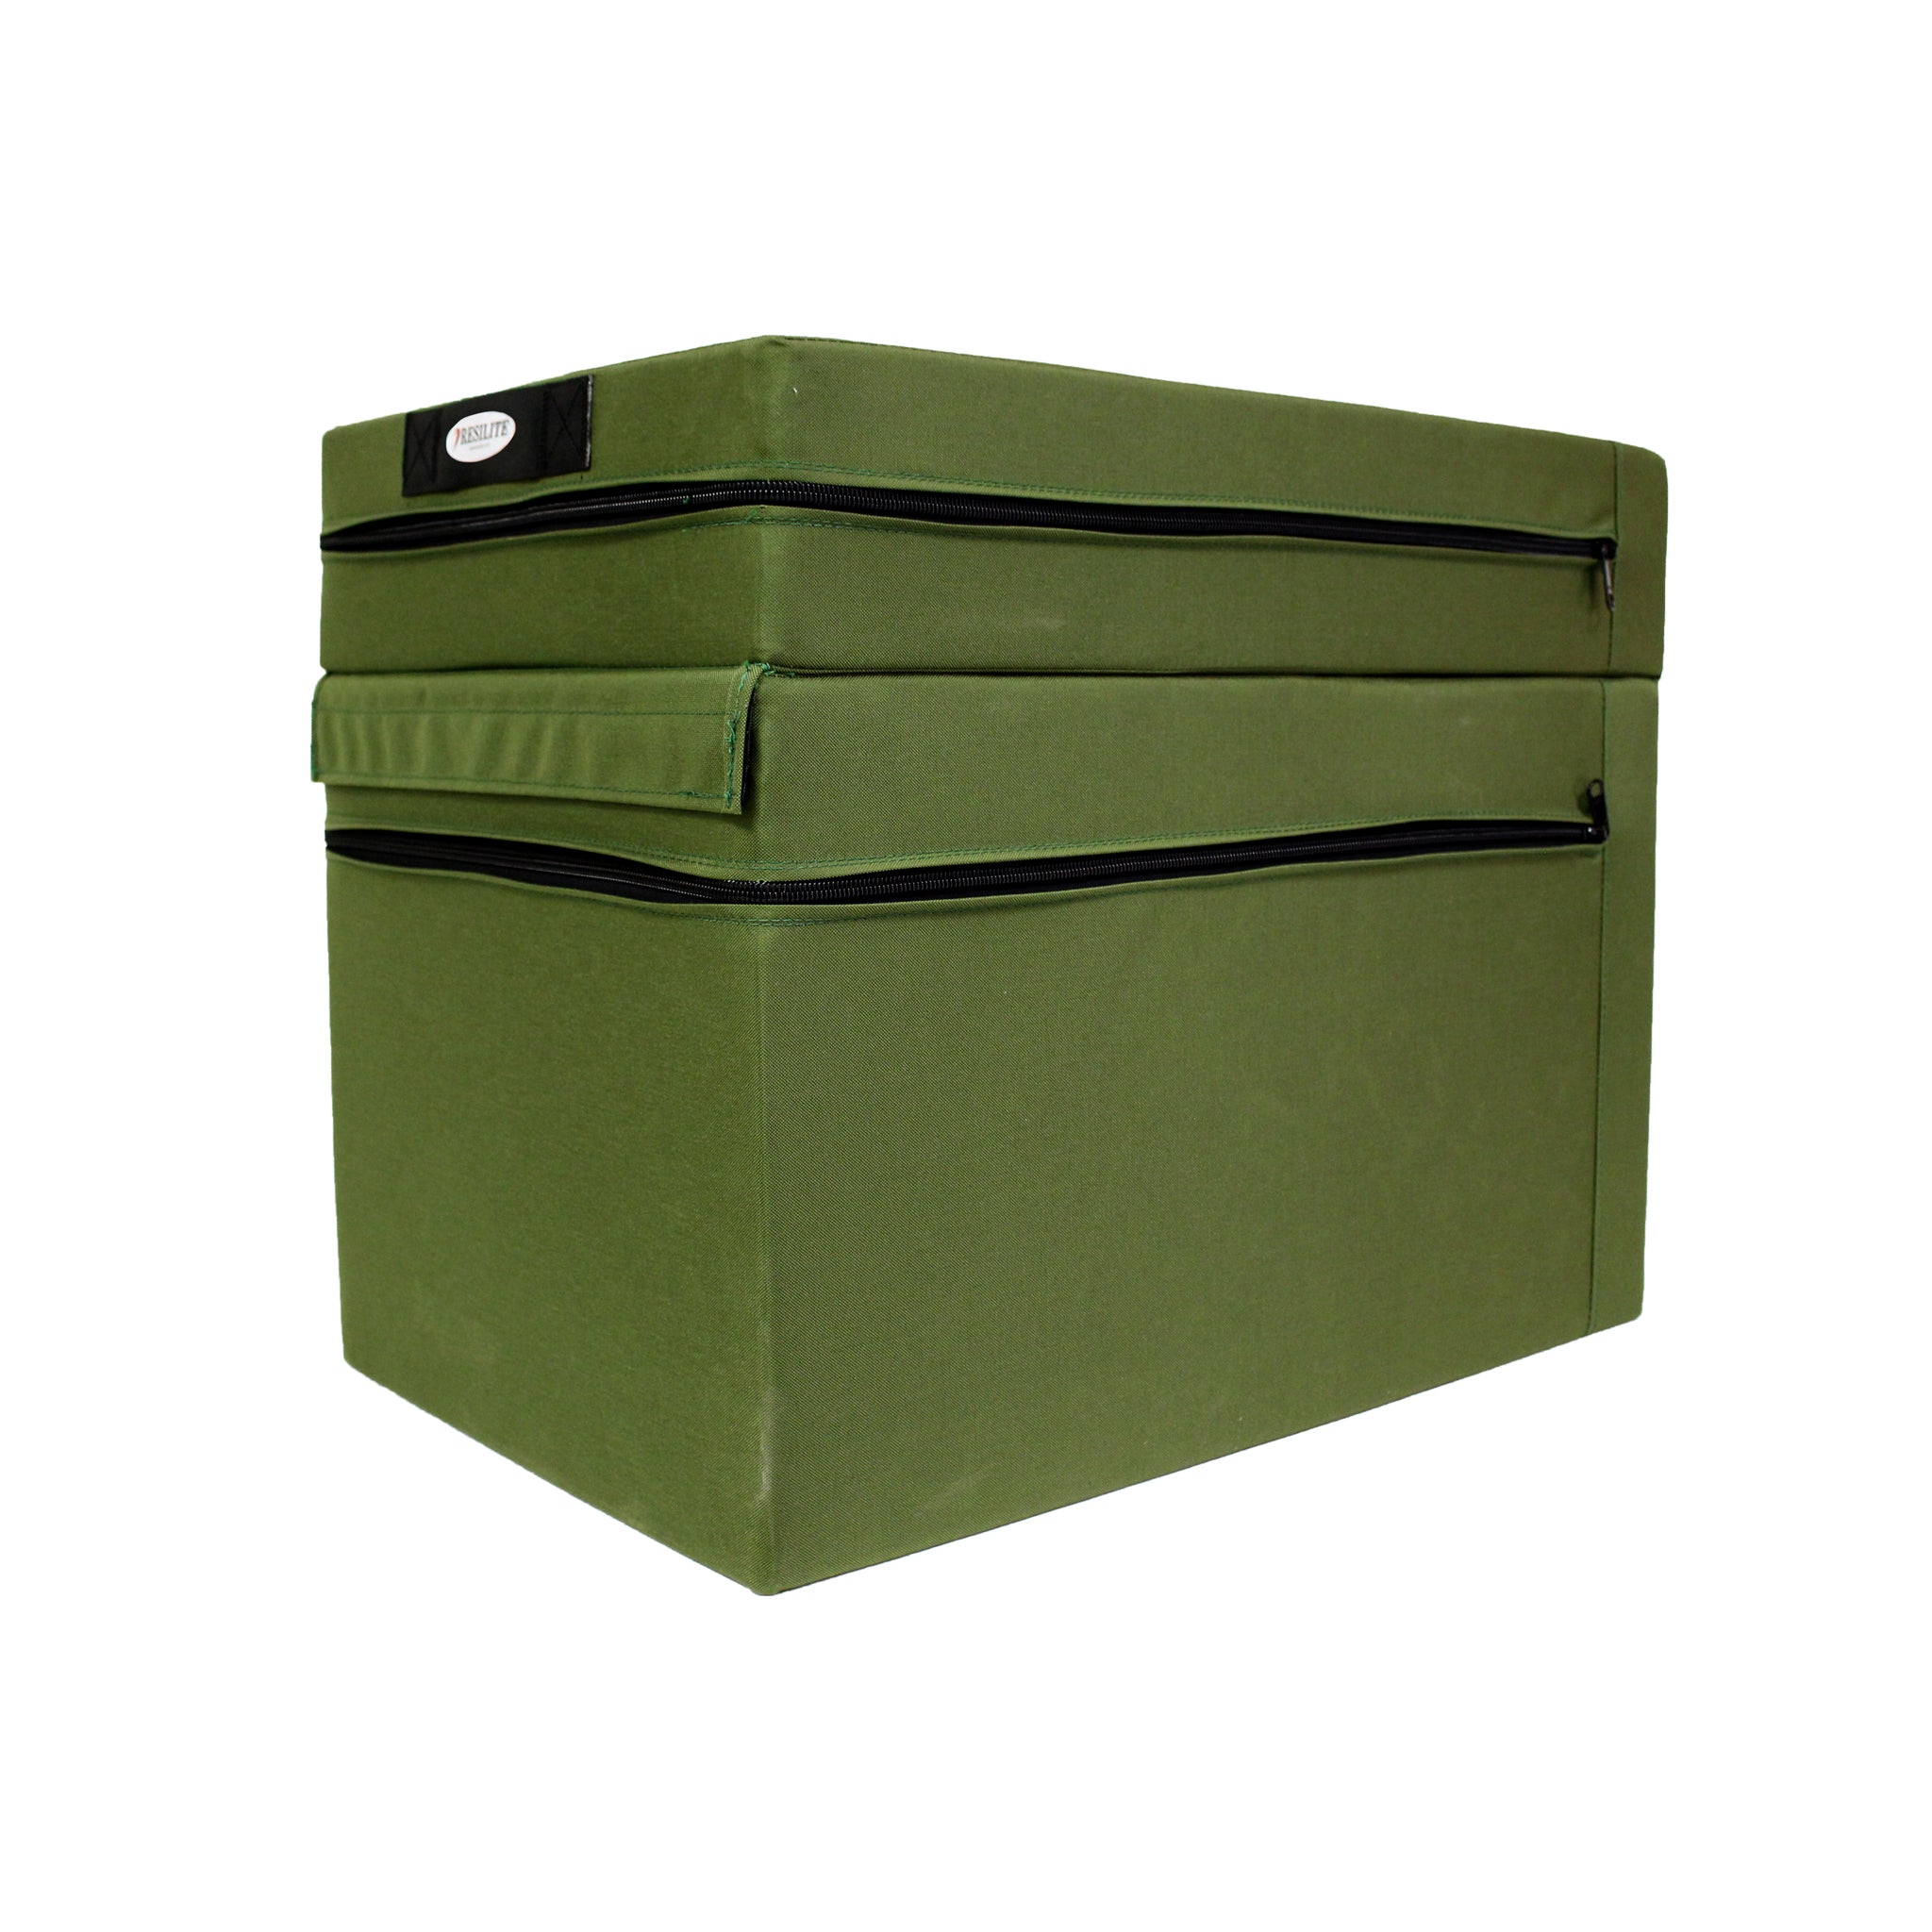 6-in-1 Plyo-Box (Olive Fabric) - STCK-PLYB6IN1-OLIVE